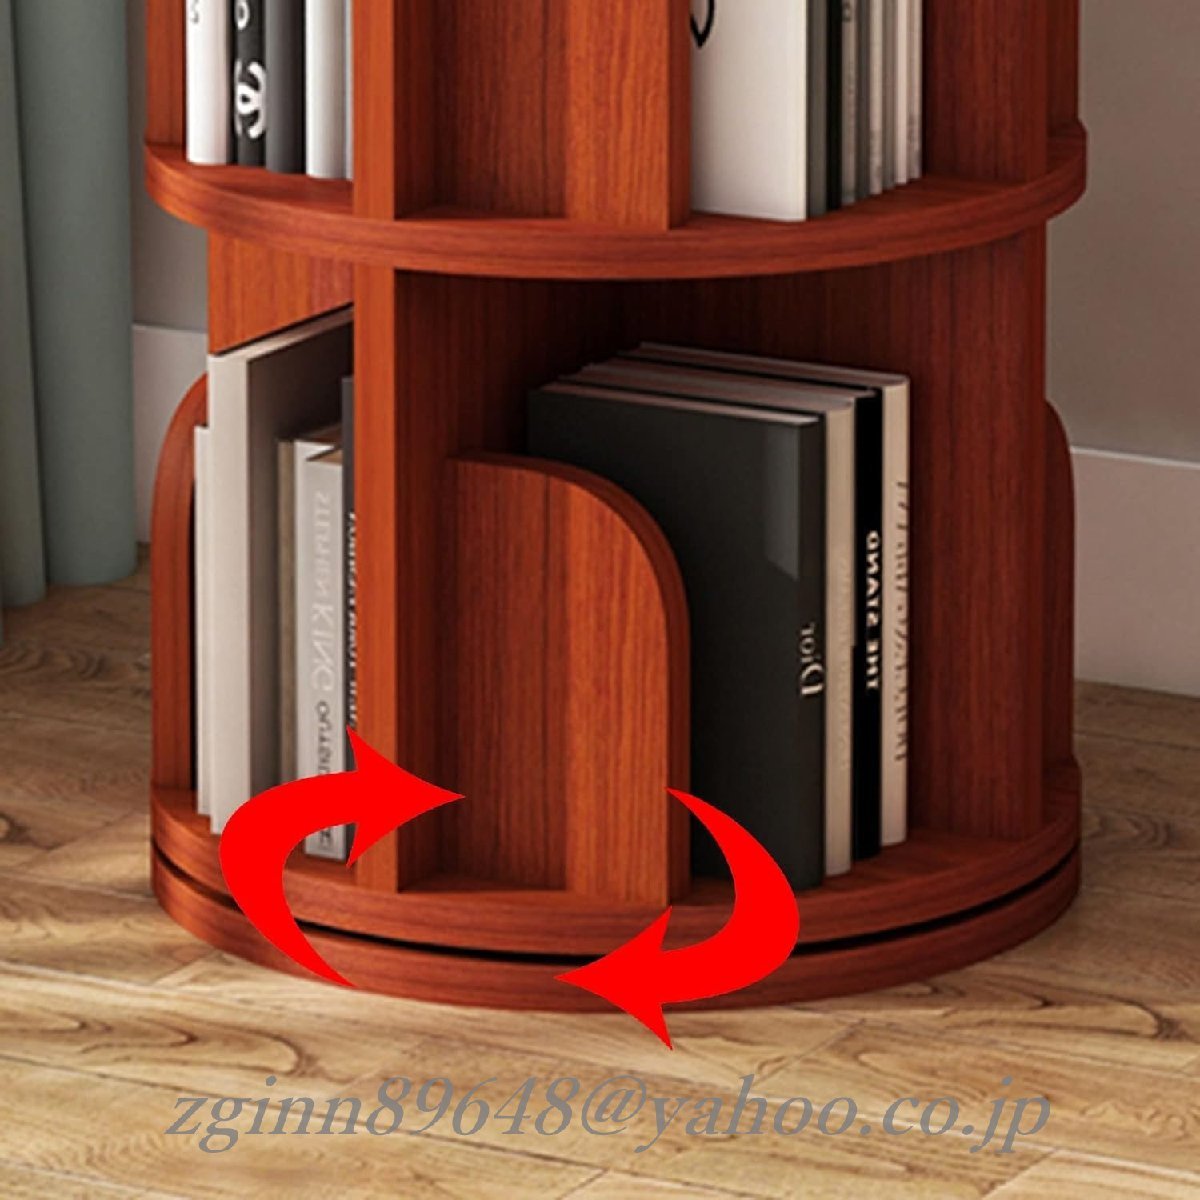  bookcase rotary bookcase natural wood shelf picture book shelves living room many step storage shelves cheeks material (Size : 39*99cm)